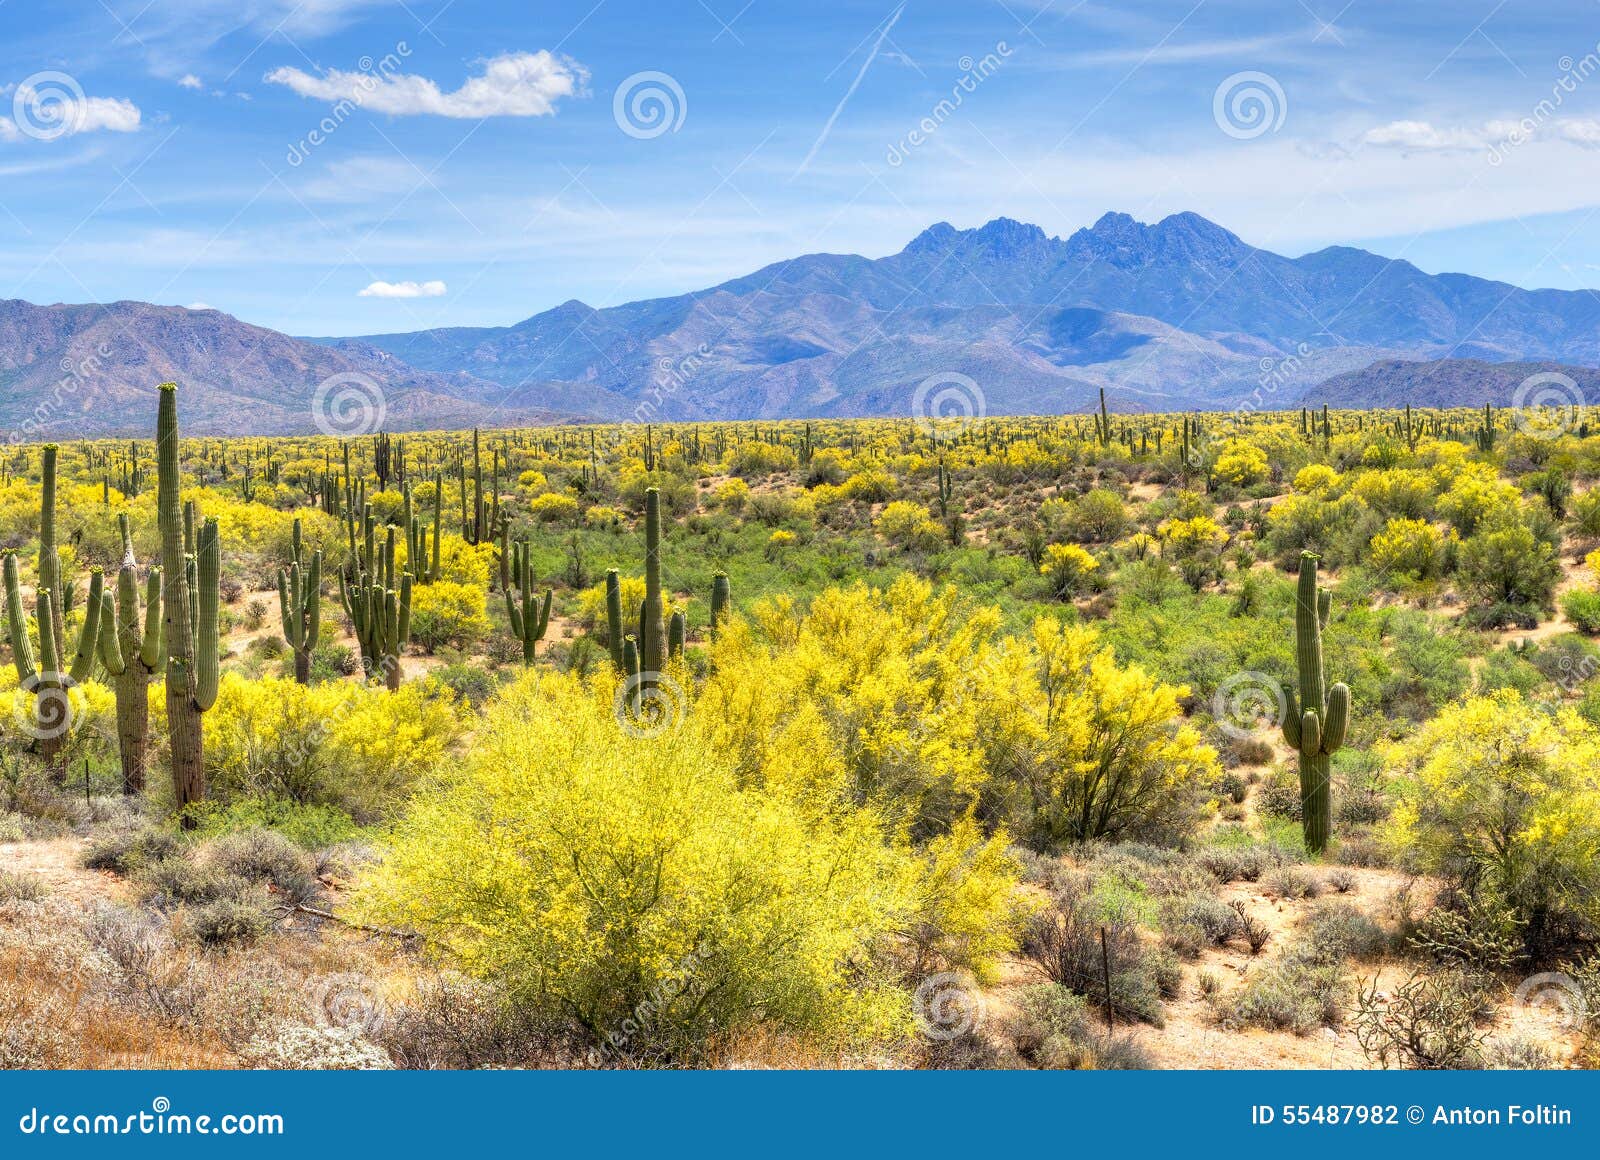 Four Peaks stock photo. Image of forest, phoenix, mountains - 55487982